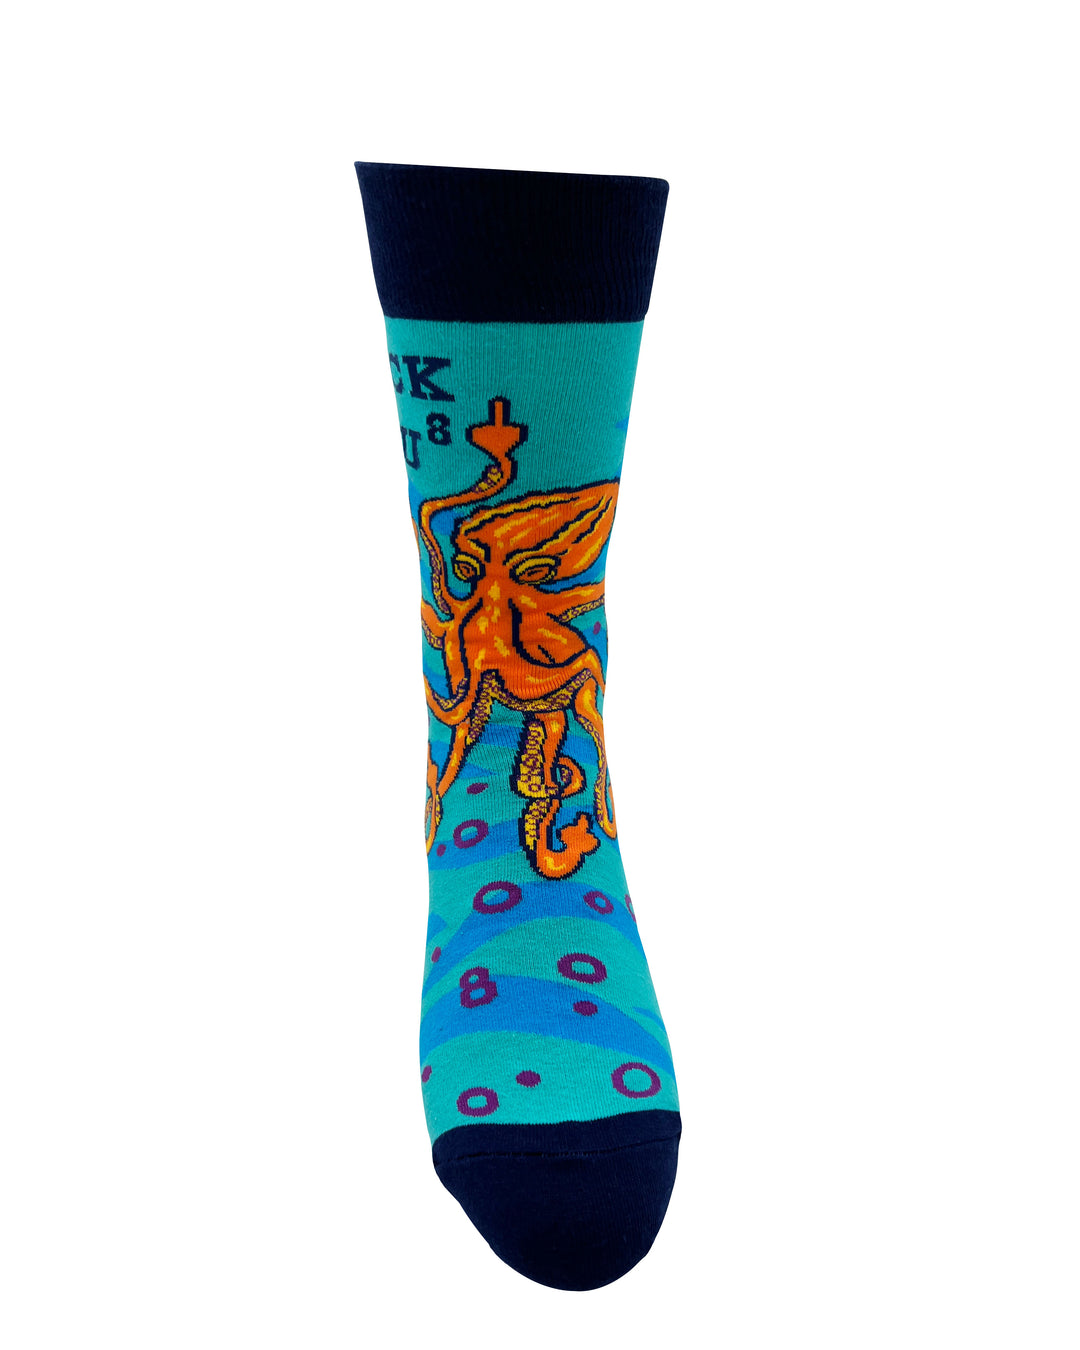 Fuck You To The Eight Men's Novelty Crew Socks